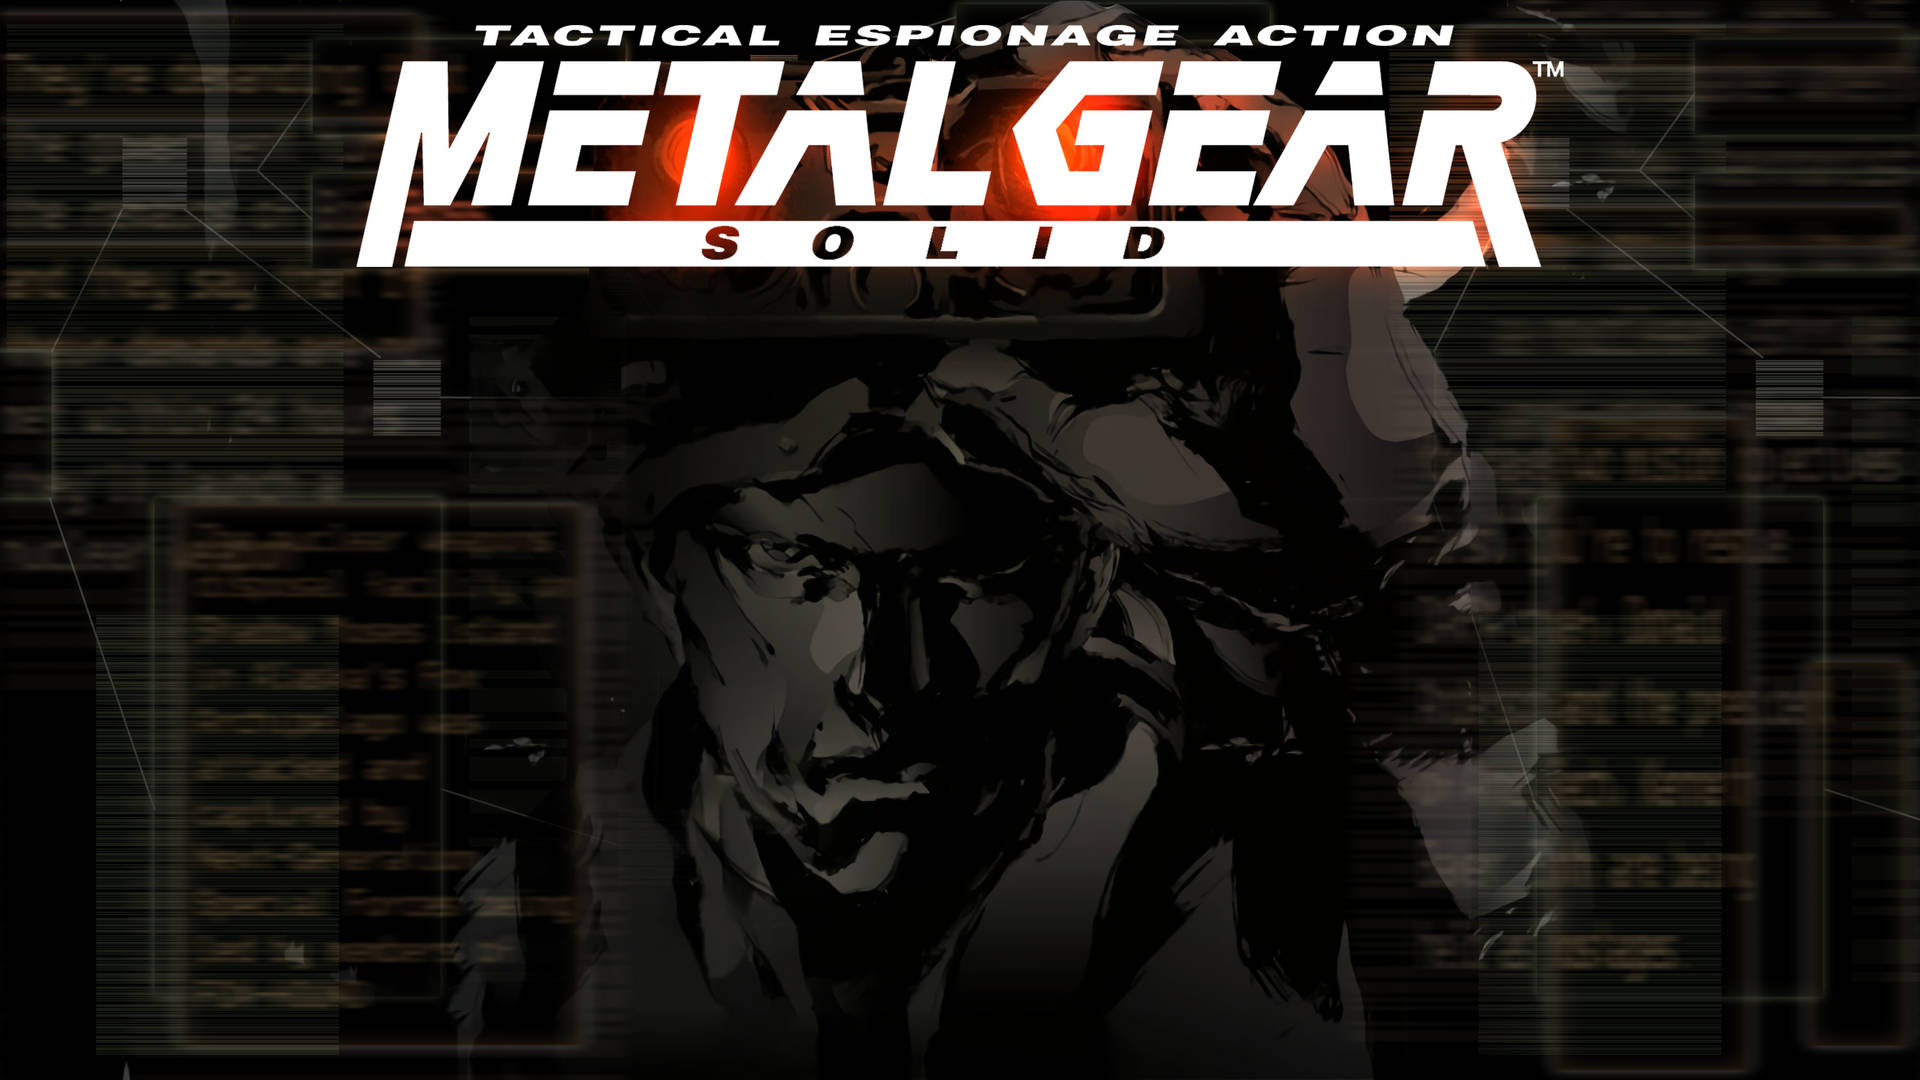 Metal Gear Solid 3840X2160 Wallpaper and Background Image